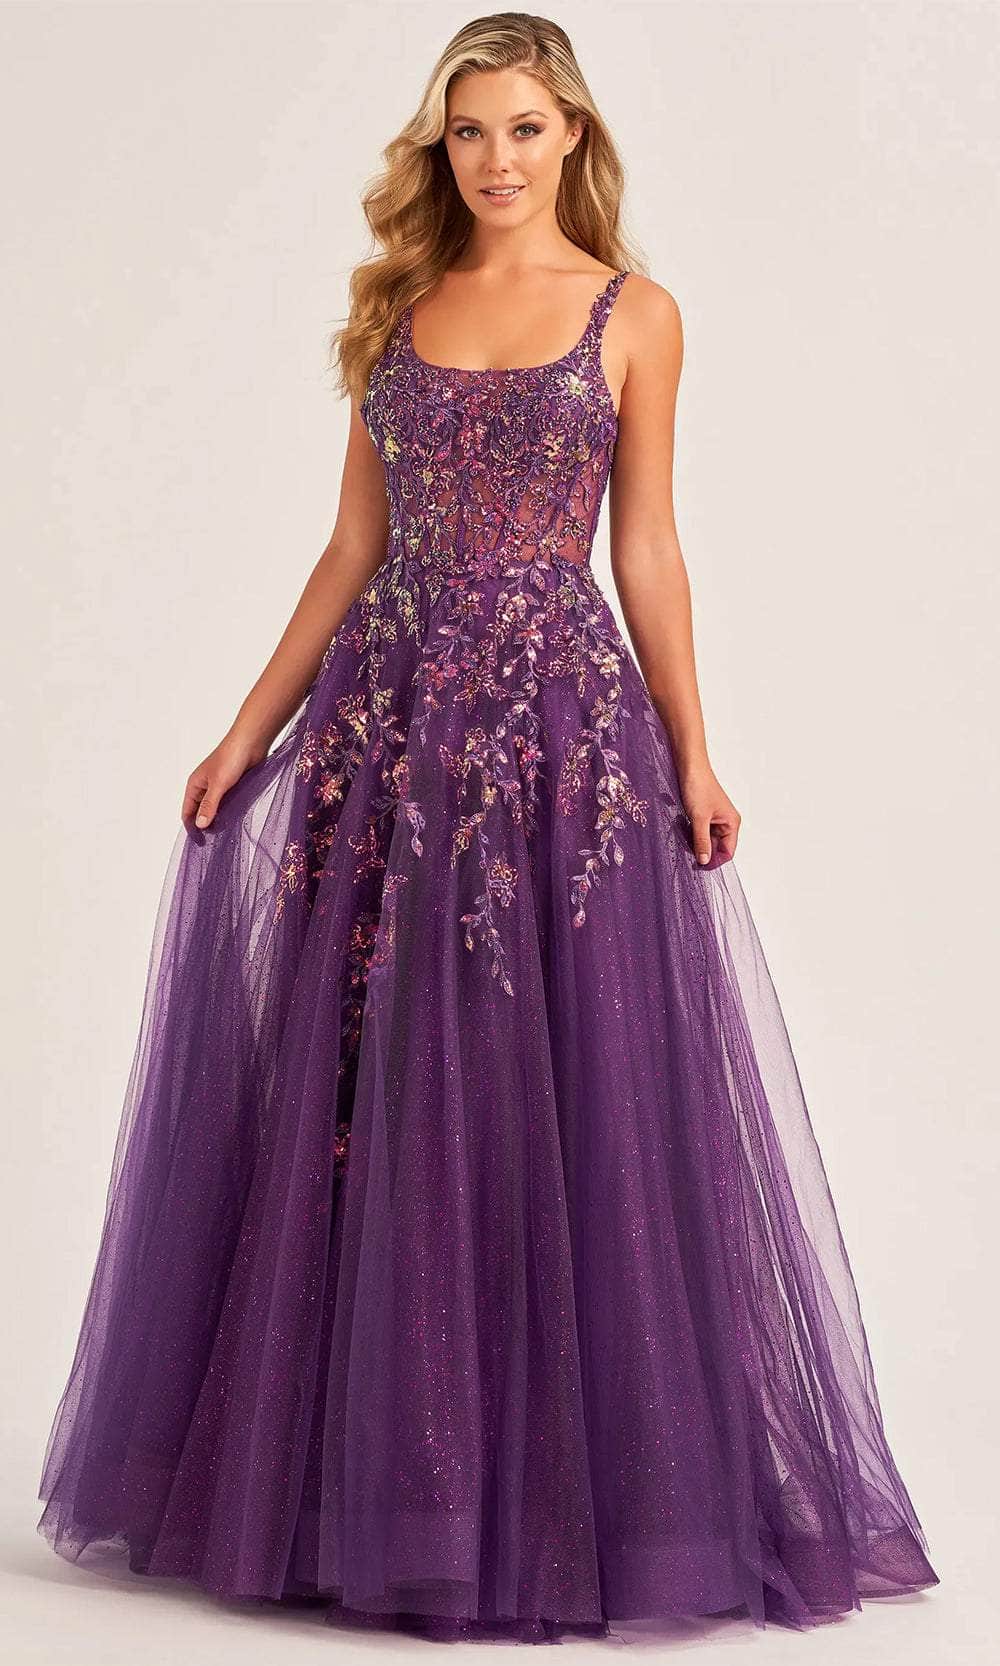 Ellie Wilde EW35242 - Embroidered Sleeveless A-Line Prom Gown
